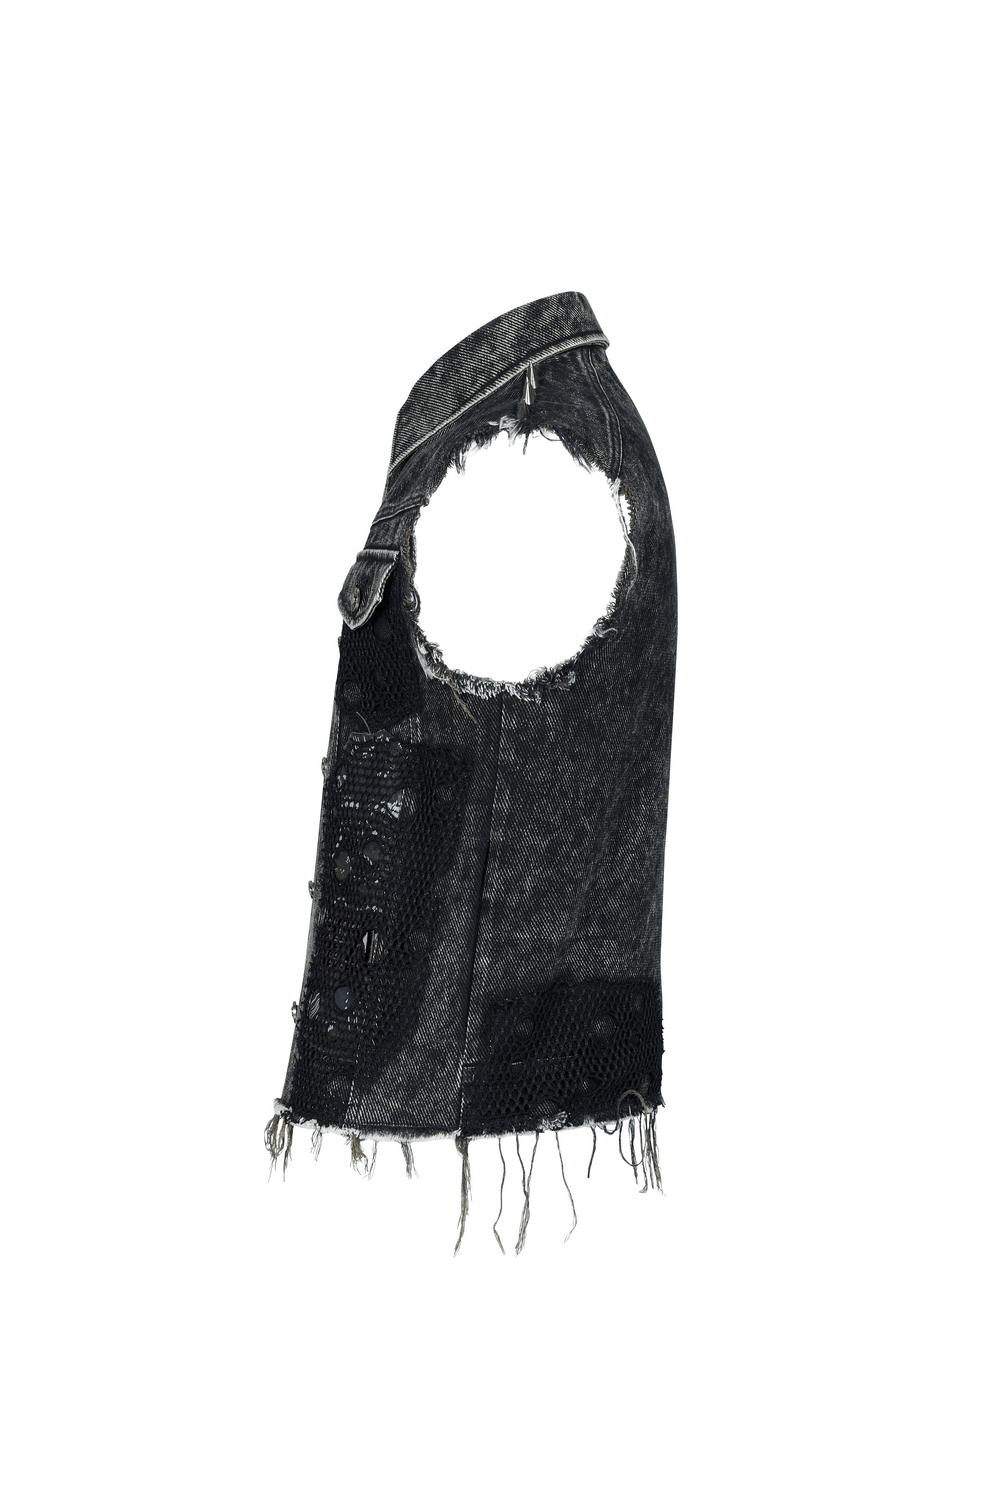 Men's Punk Denim Vest with Rivets and Patches - HARD'N'HEAVY